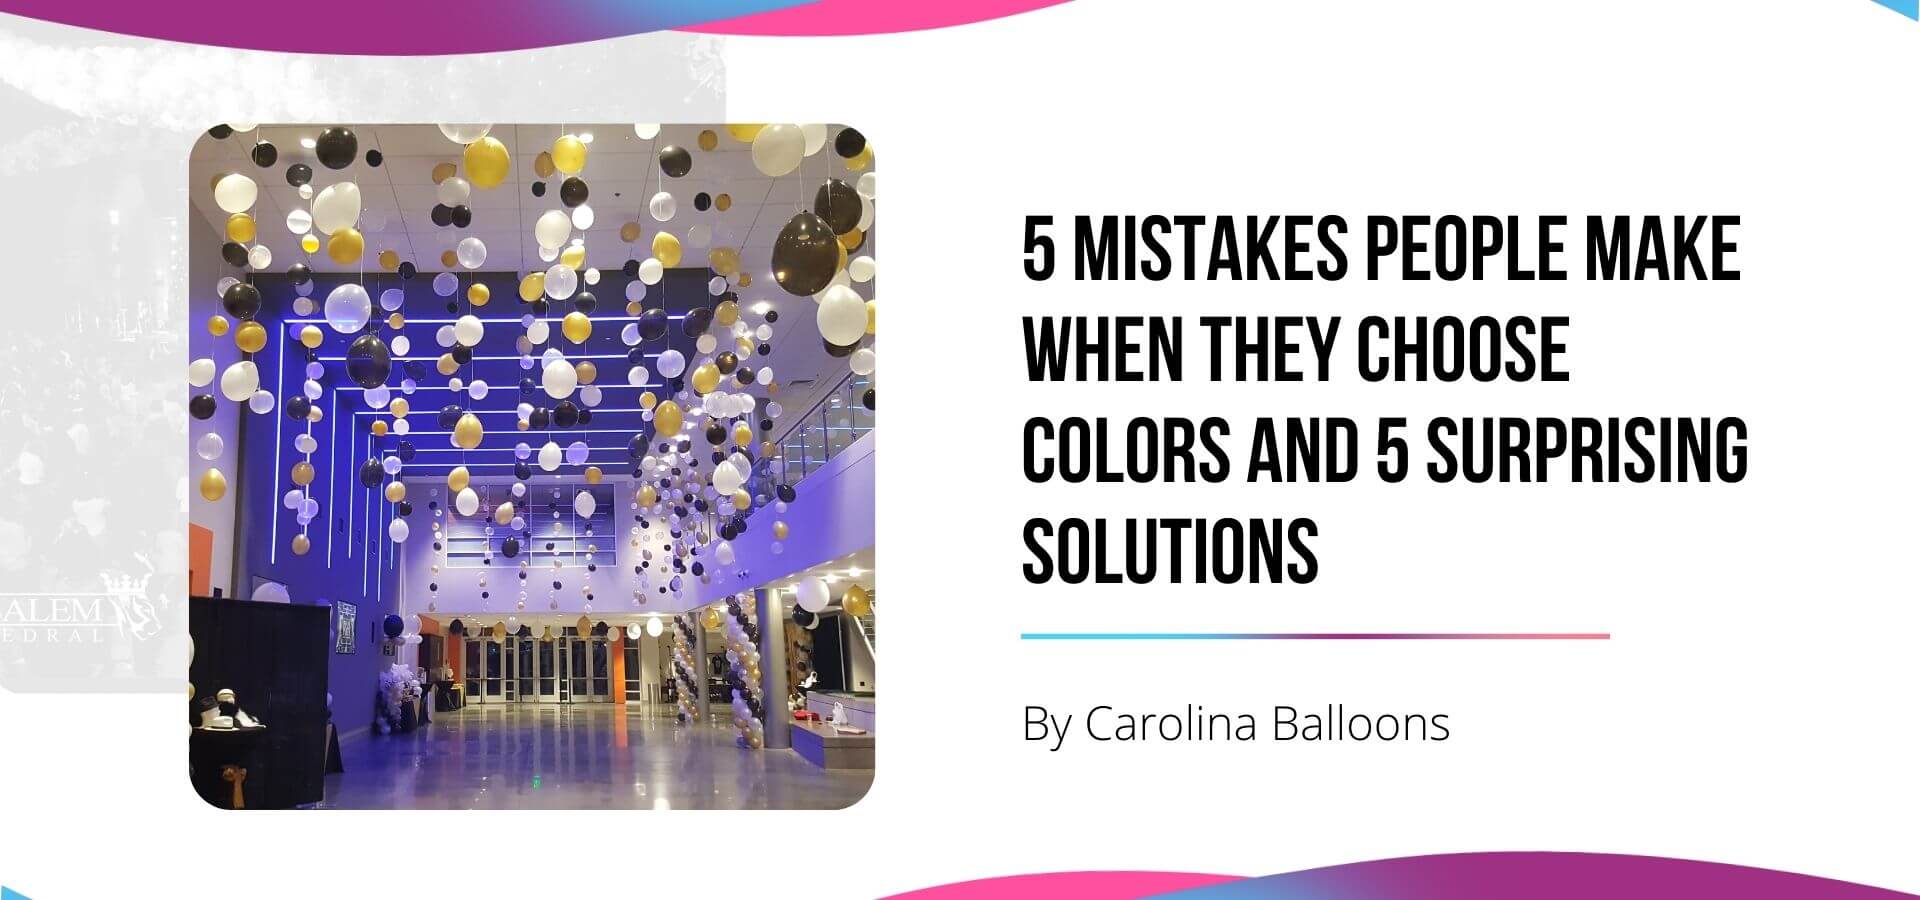 5 Mistakes People Make When They Choose Colors and 5 Surprising Solutions